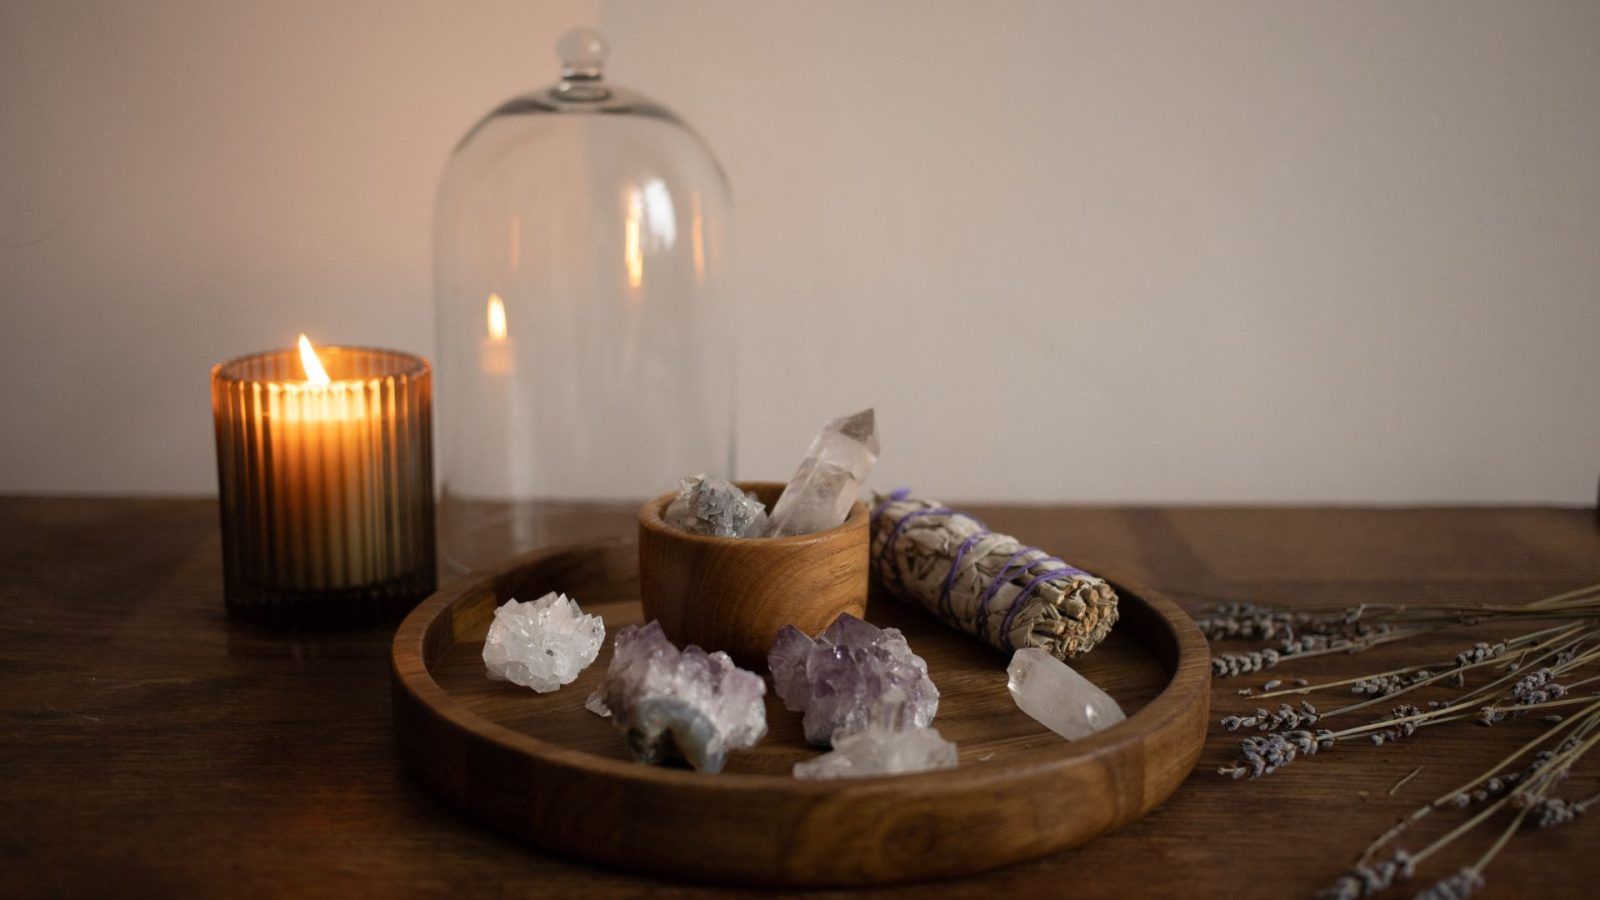 Crystal Candles - The Most Frequently Asked Questions